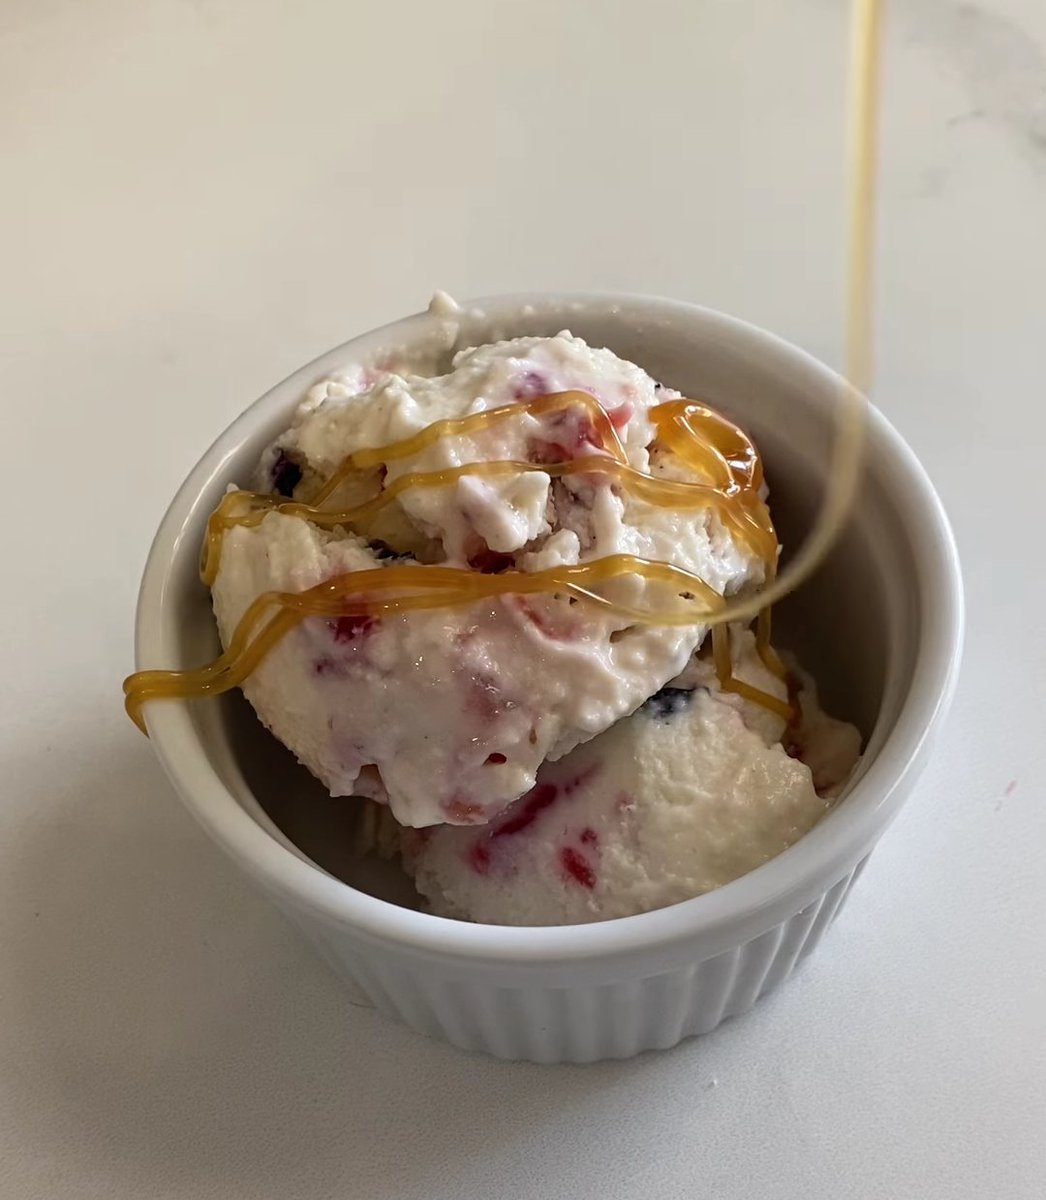 m.facebook.com/story.php?stor…
⬆️Ice Cream Video Recipe by Tupperware using Tupperware Products #tupperware #RecipeOfTheDay #icecream #icecreamrecipe #treats #yummy #howtomakeicecream #homemadeicecream #recipe #shoppingqueen 
Last Day of SALE! #dealsoftheday #summertreats #picnicidea